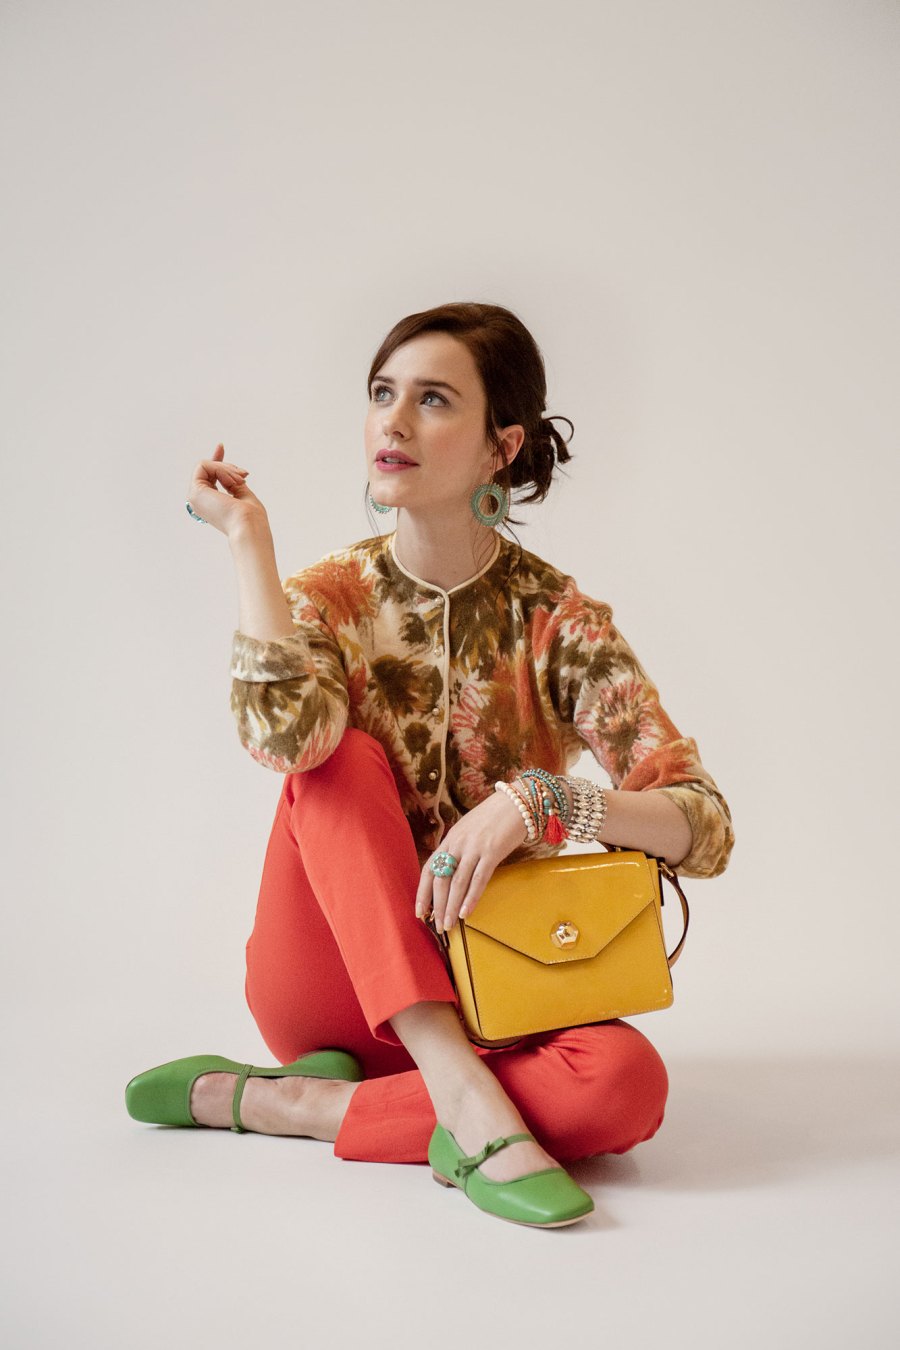 Rachel Brosnahan Is the New Face of Late Aunt Kate Spade's Label